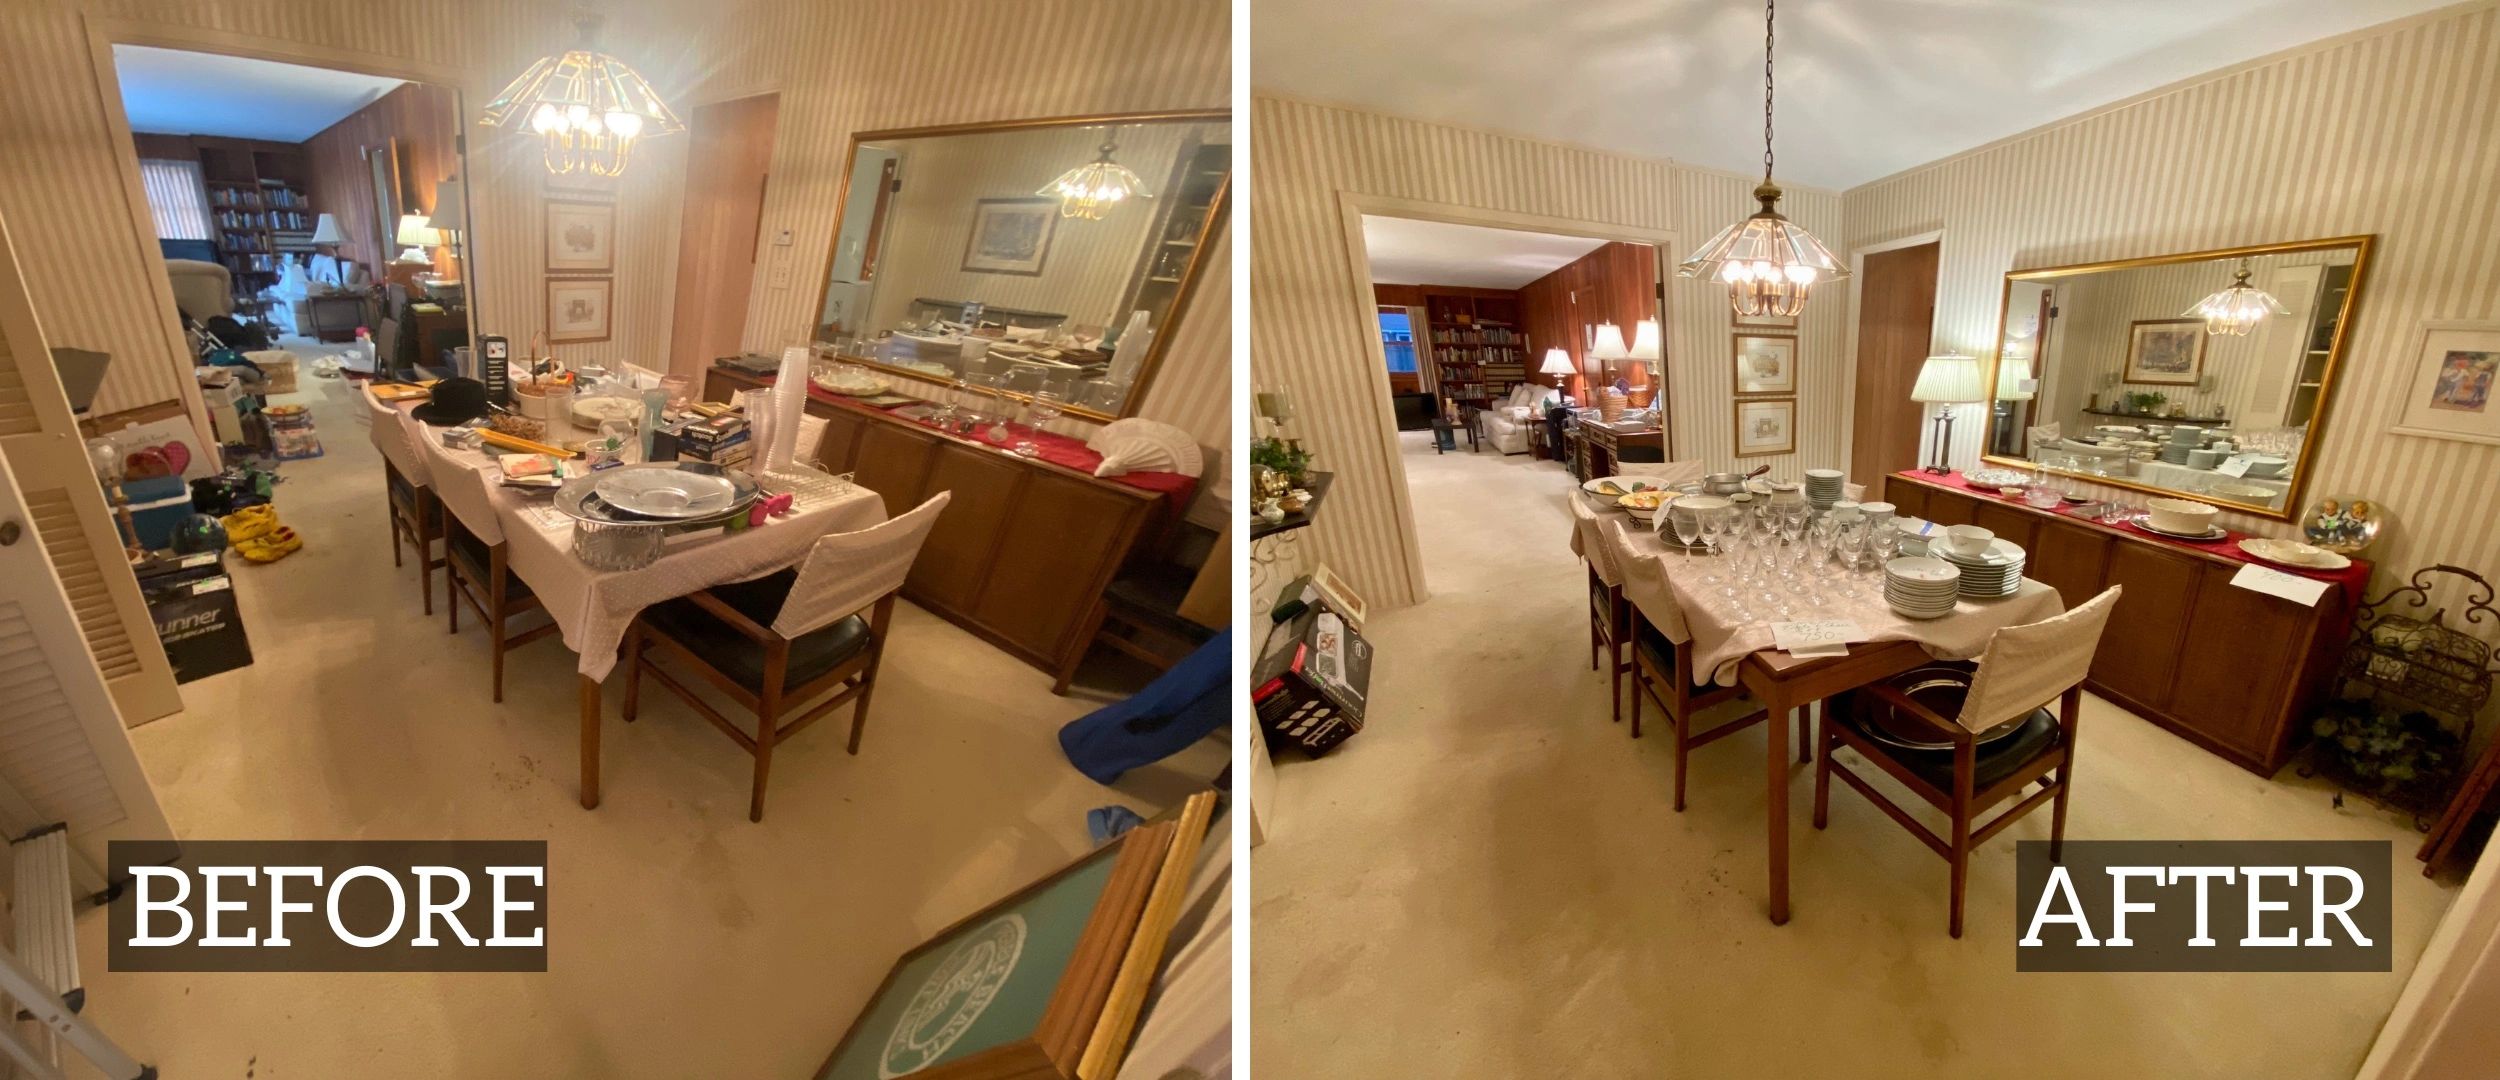 Dining Room goes from a mess to success!